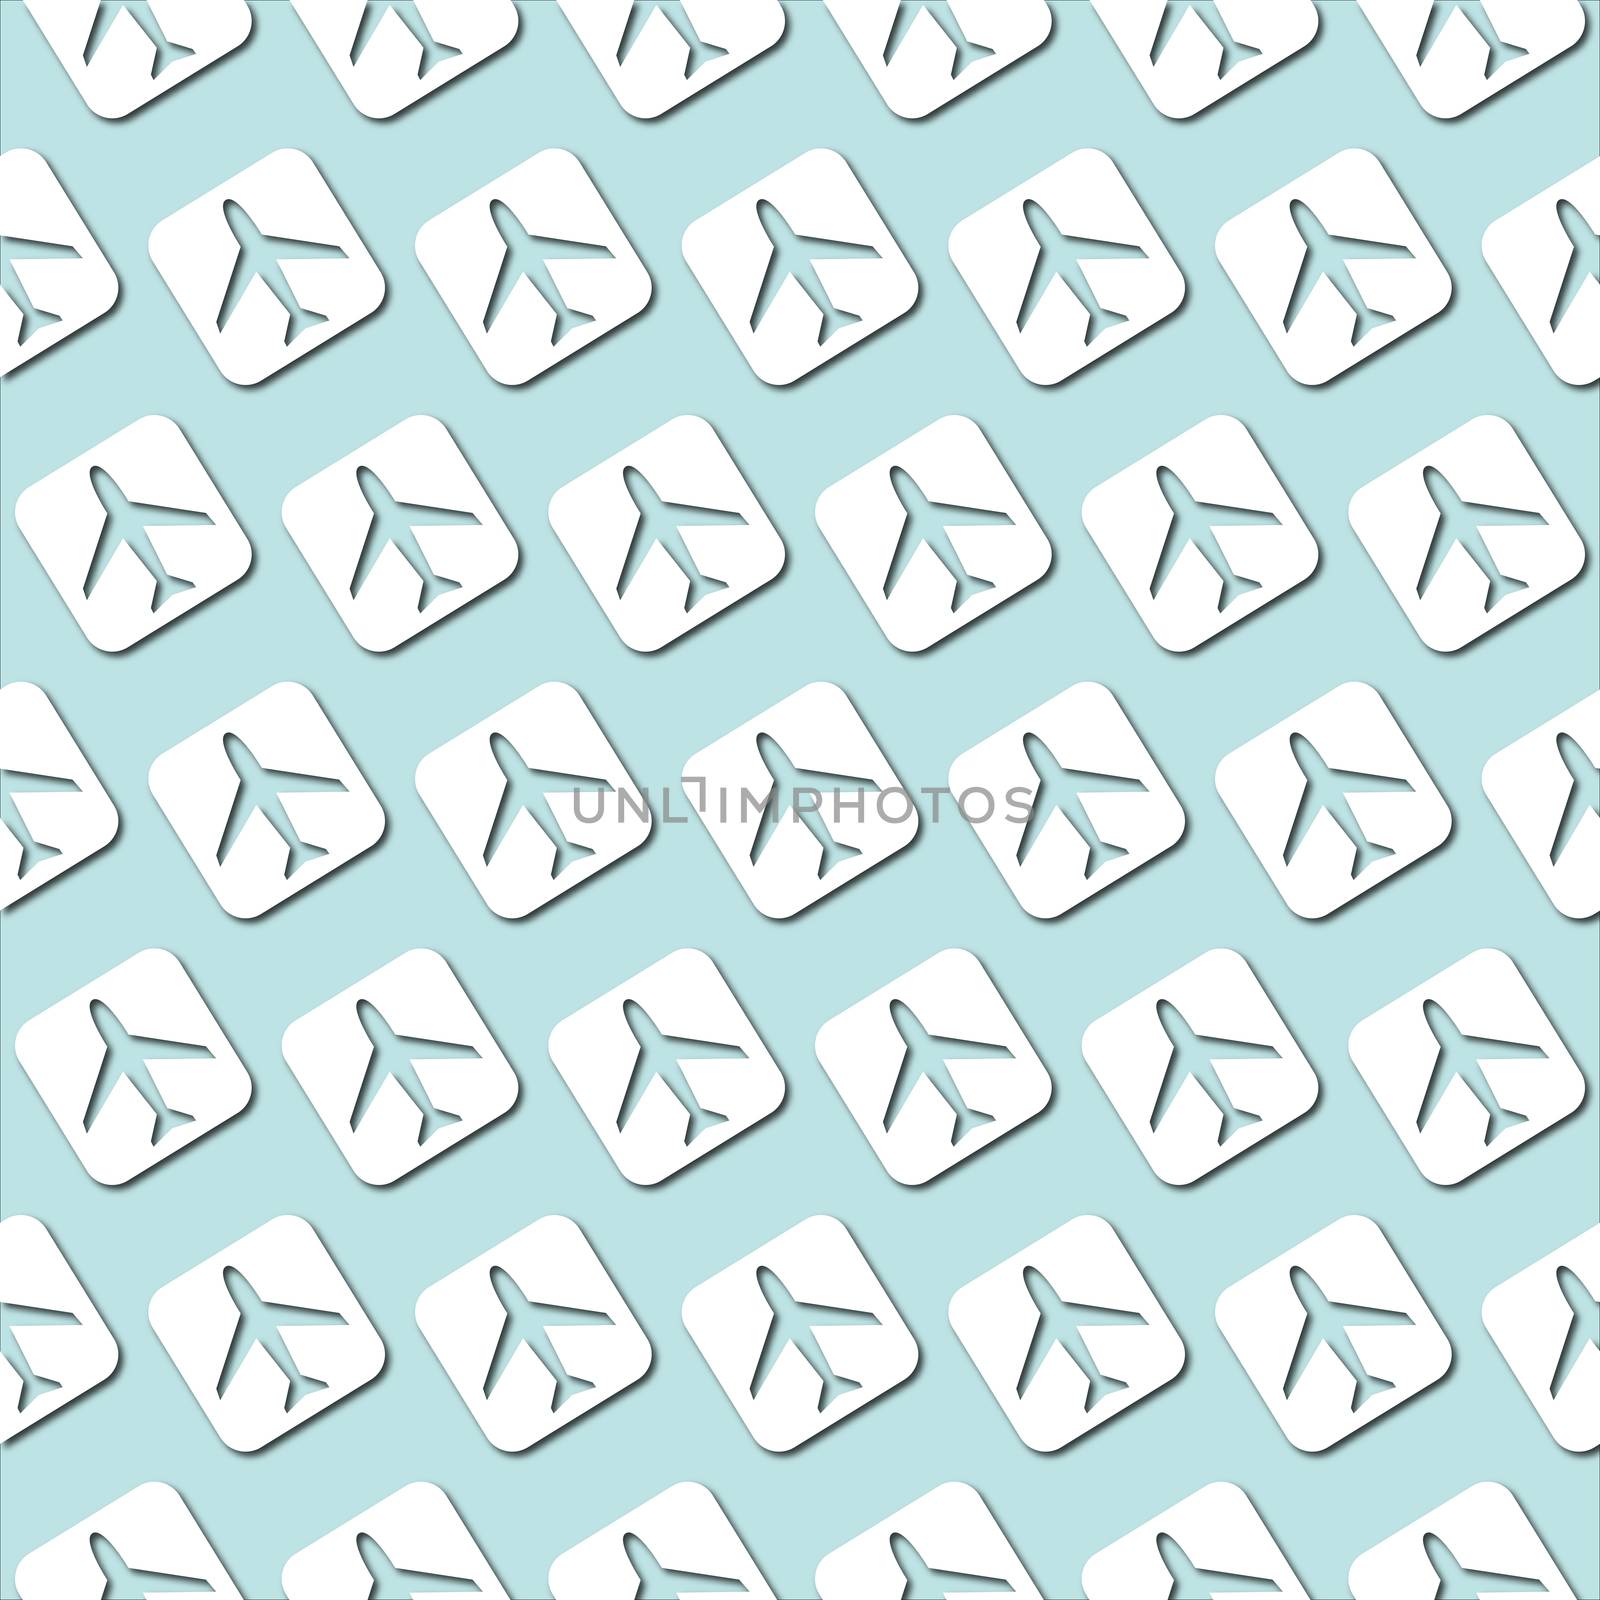 White plane icon on pale blue turquoise background, seamless pattern. Paper cut style with drop shadows and highlights.